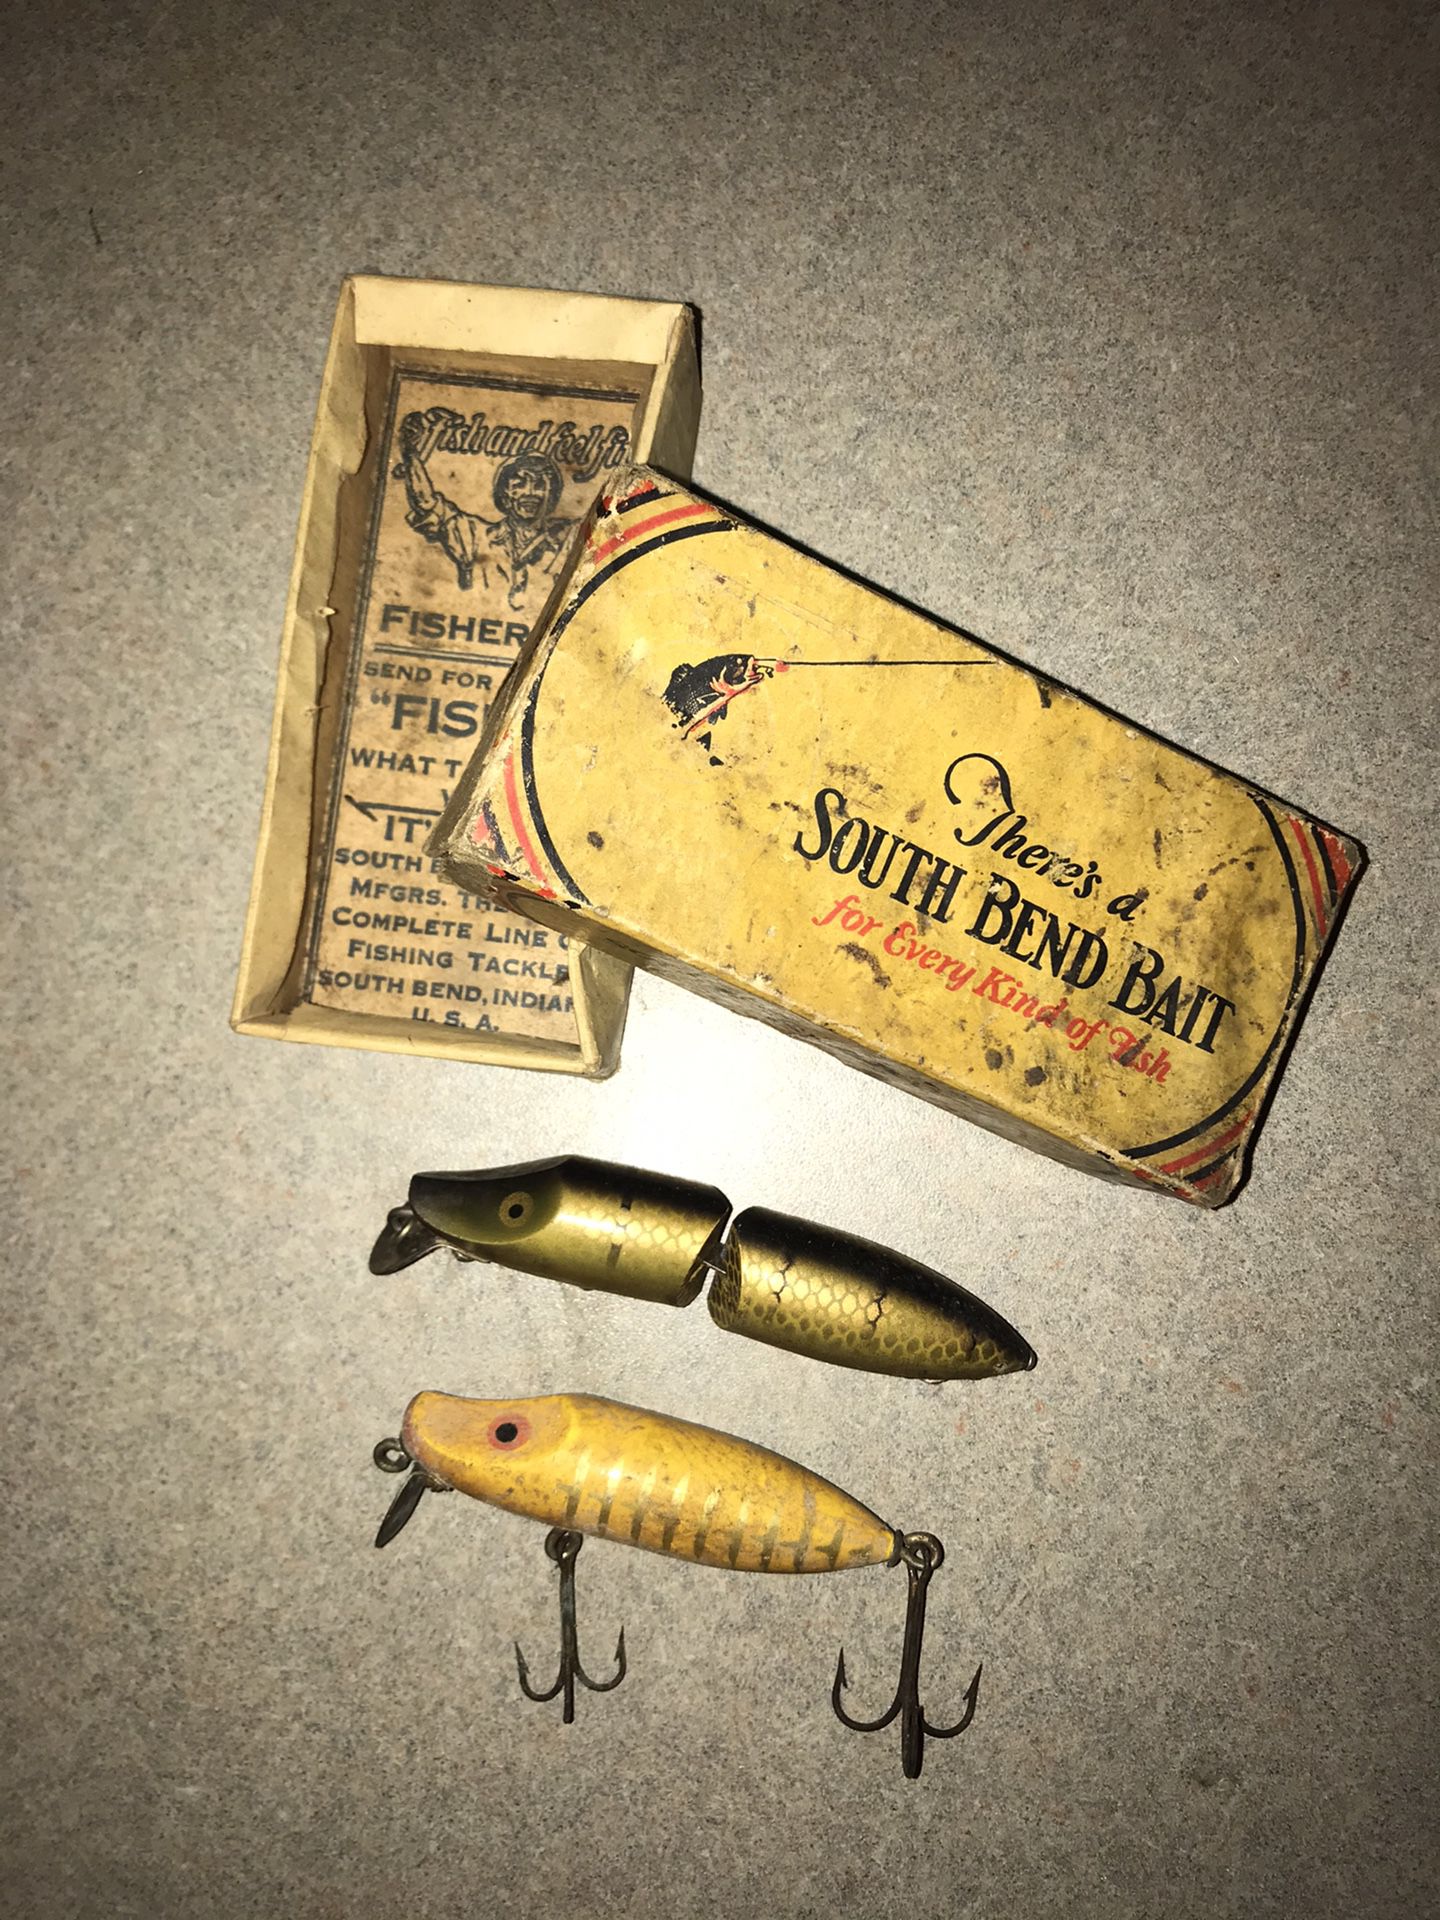 Vintage South Bend Bait Co. Fishing Lures